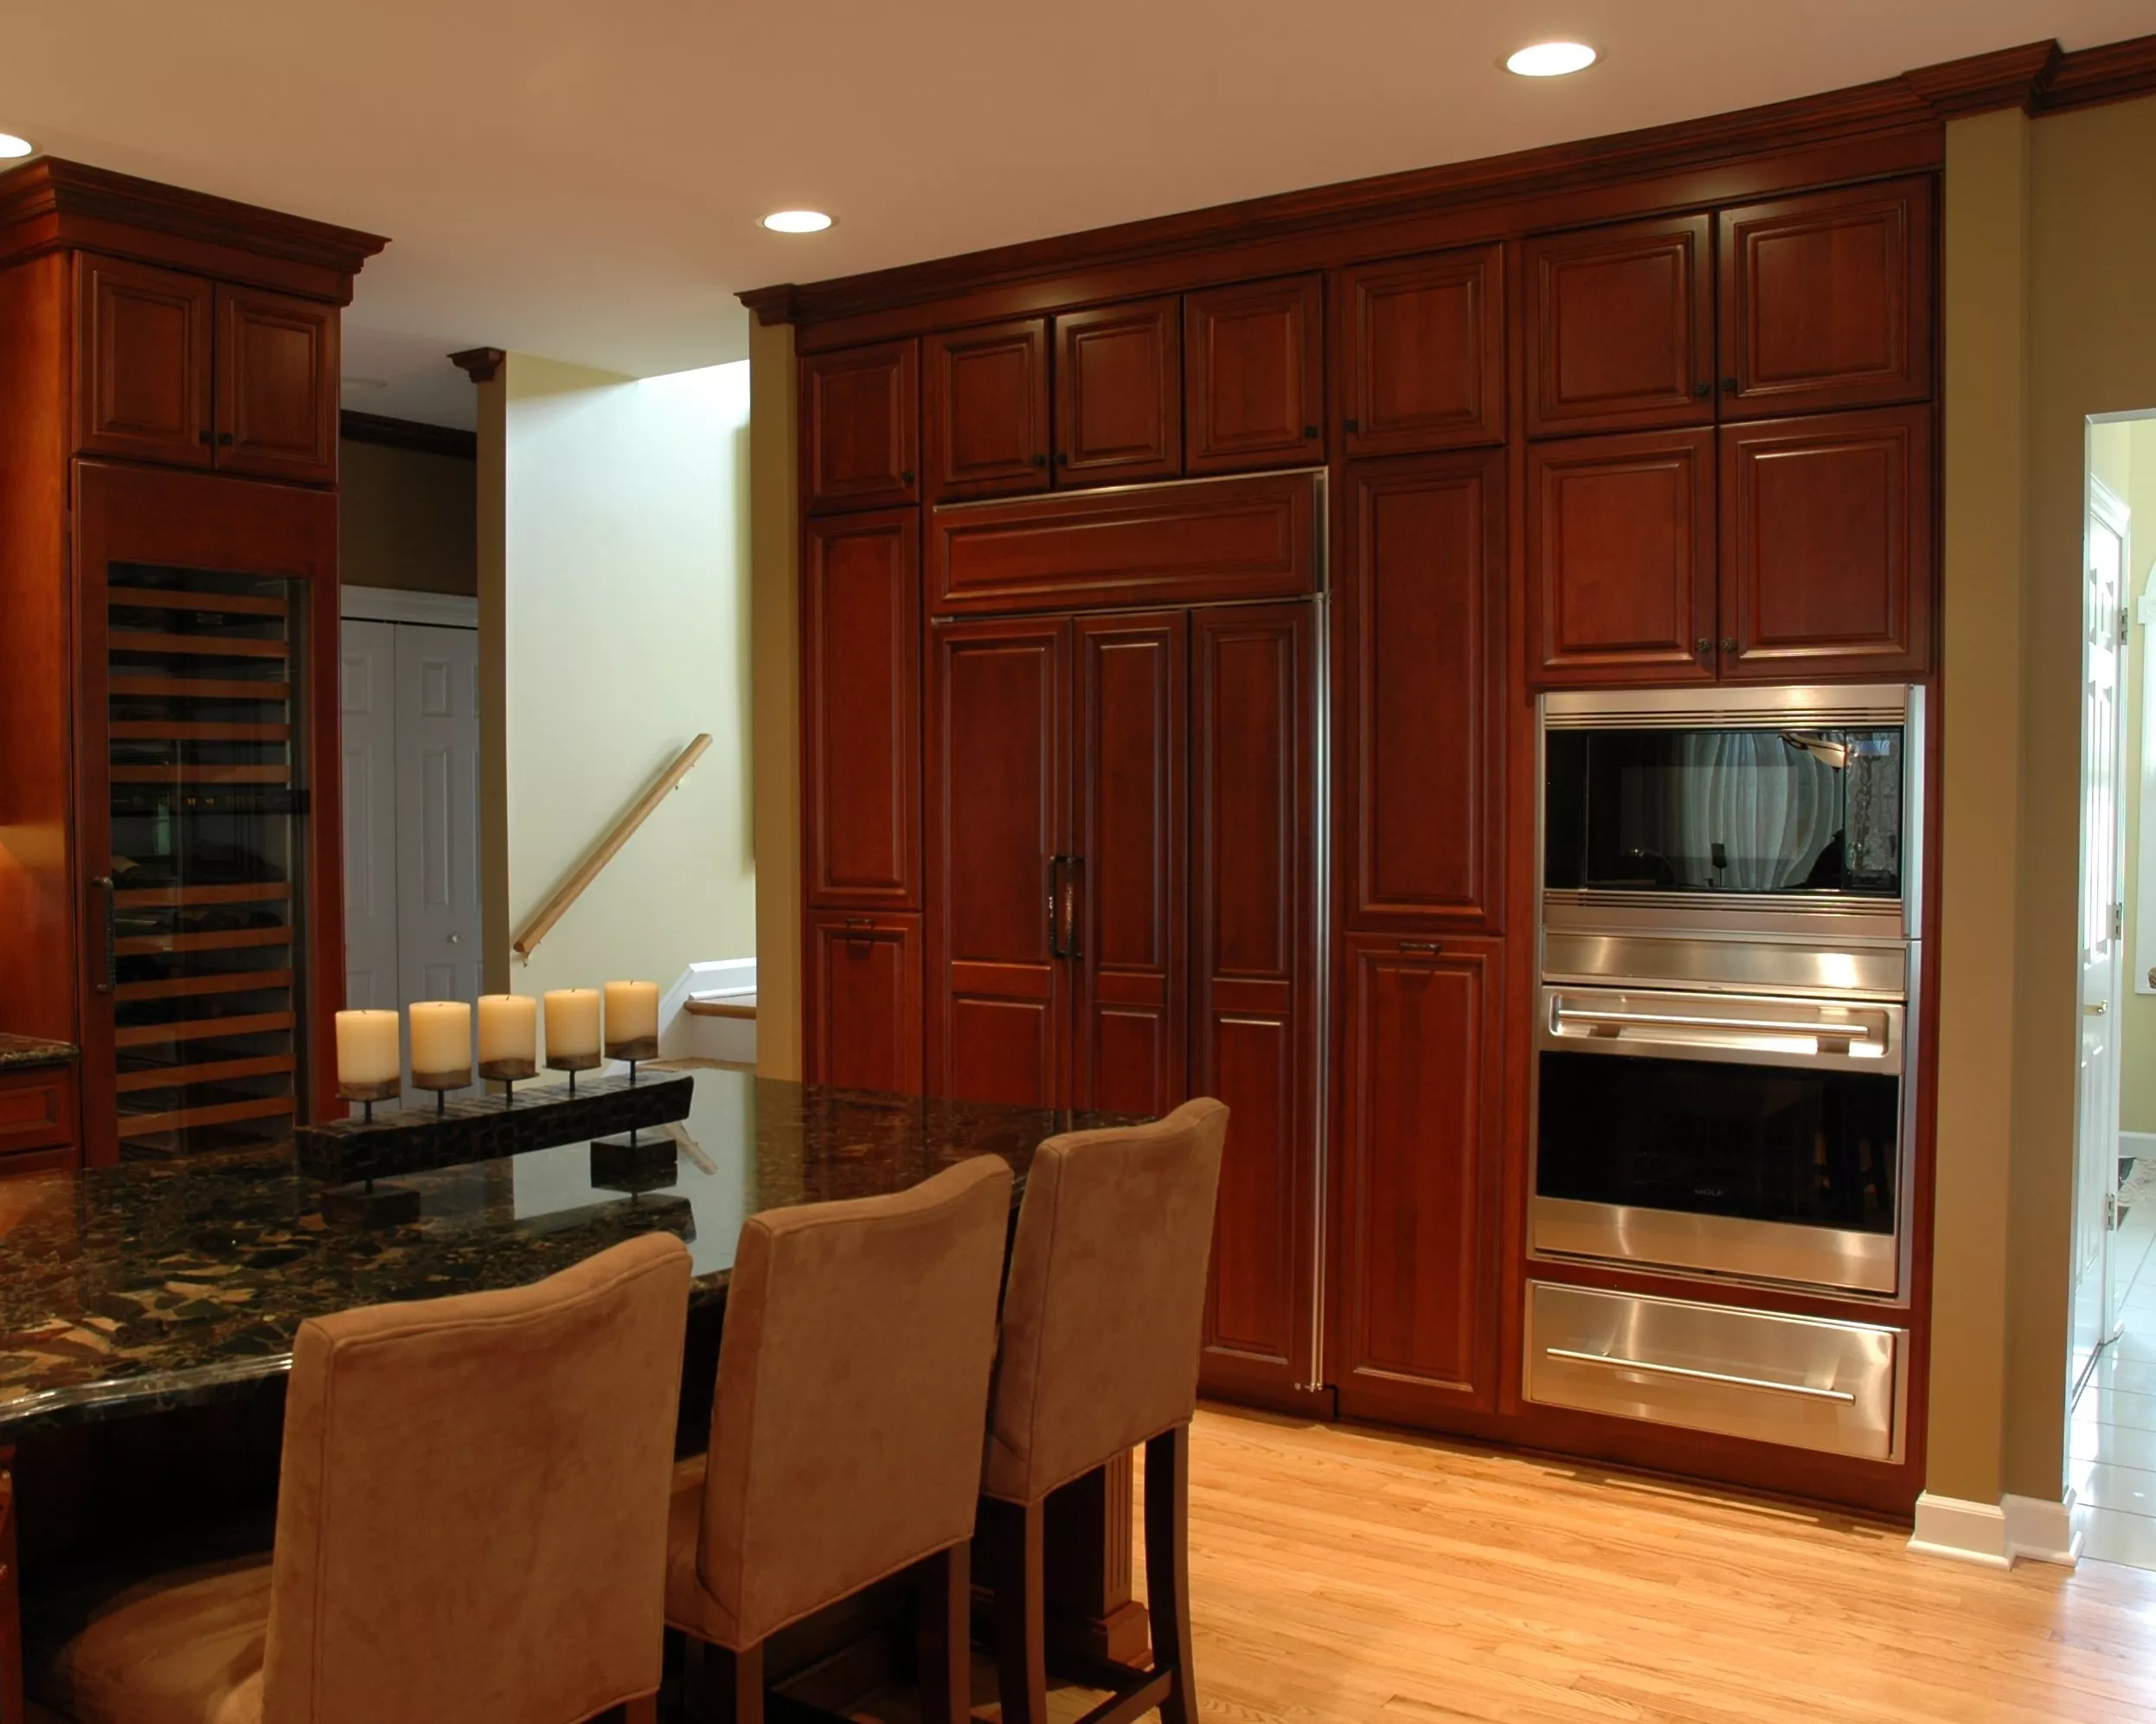 Kitchen with multifunctional ovens, a wine reserve and red wood cabinets